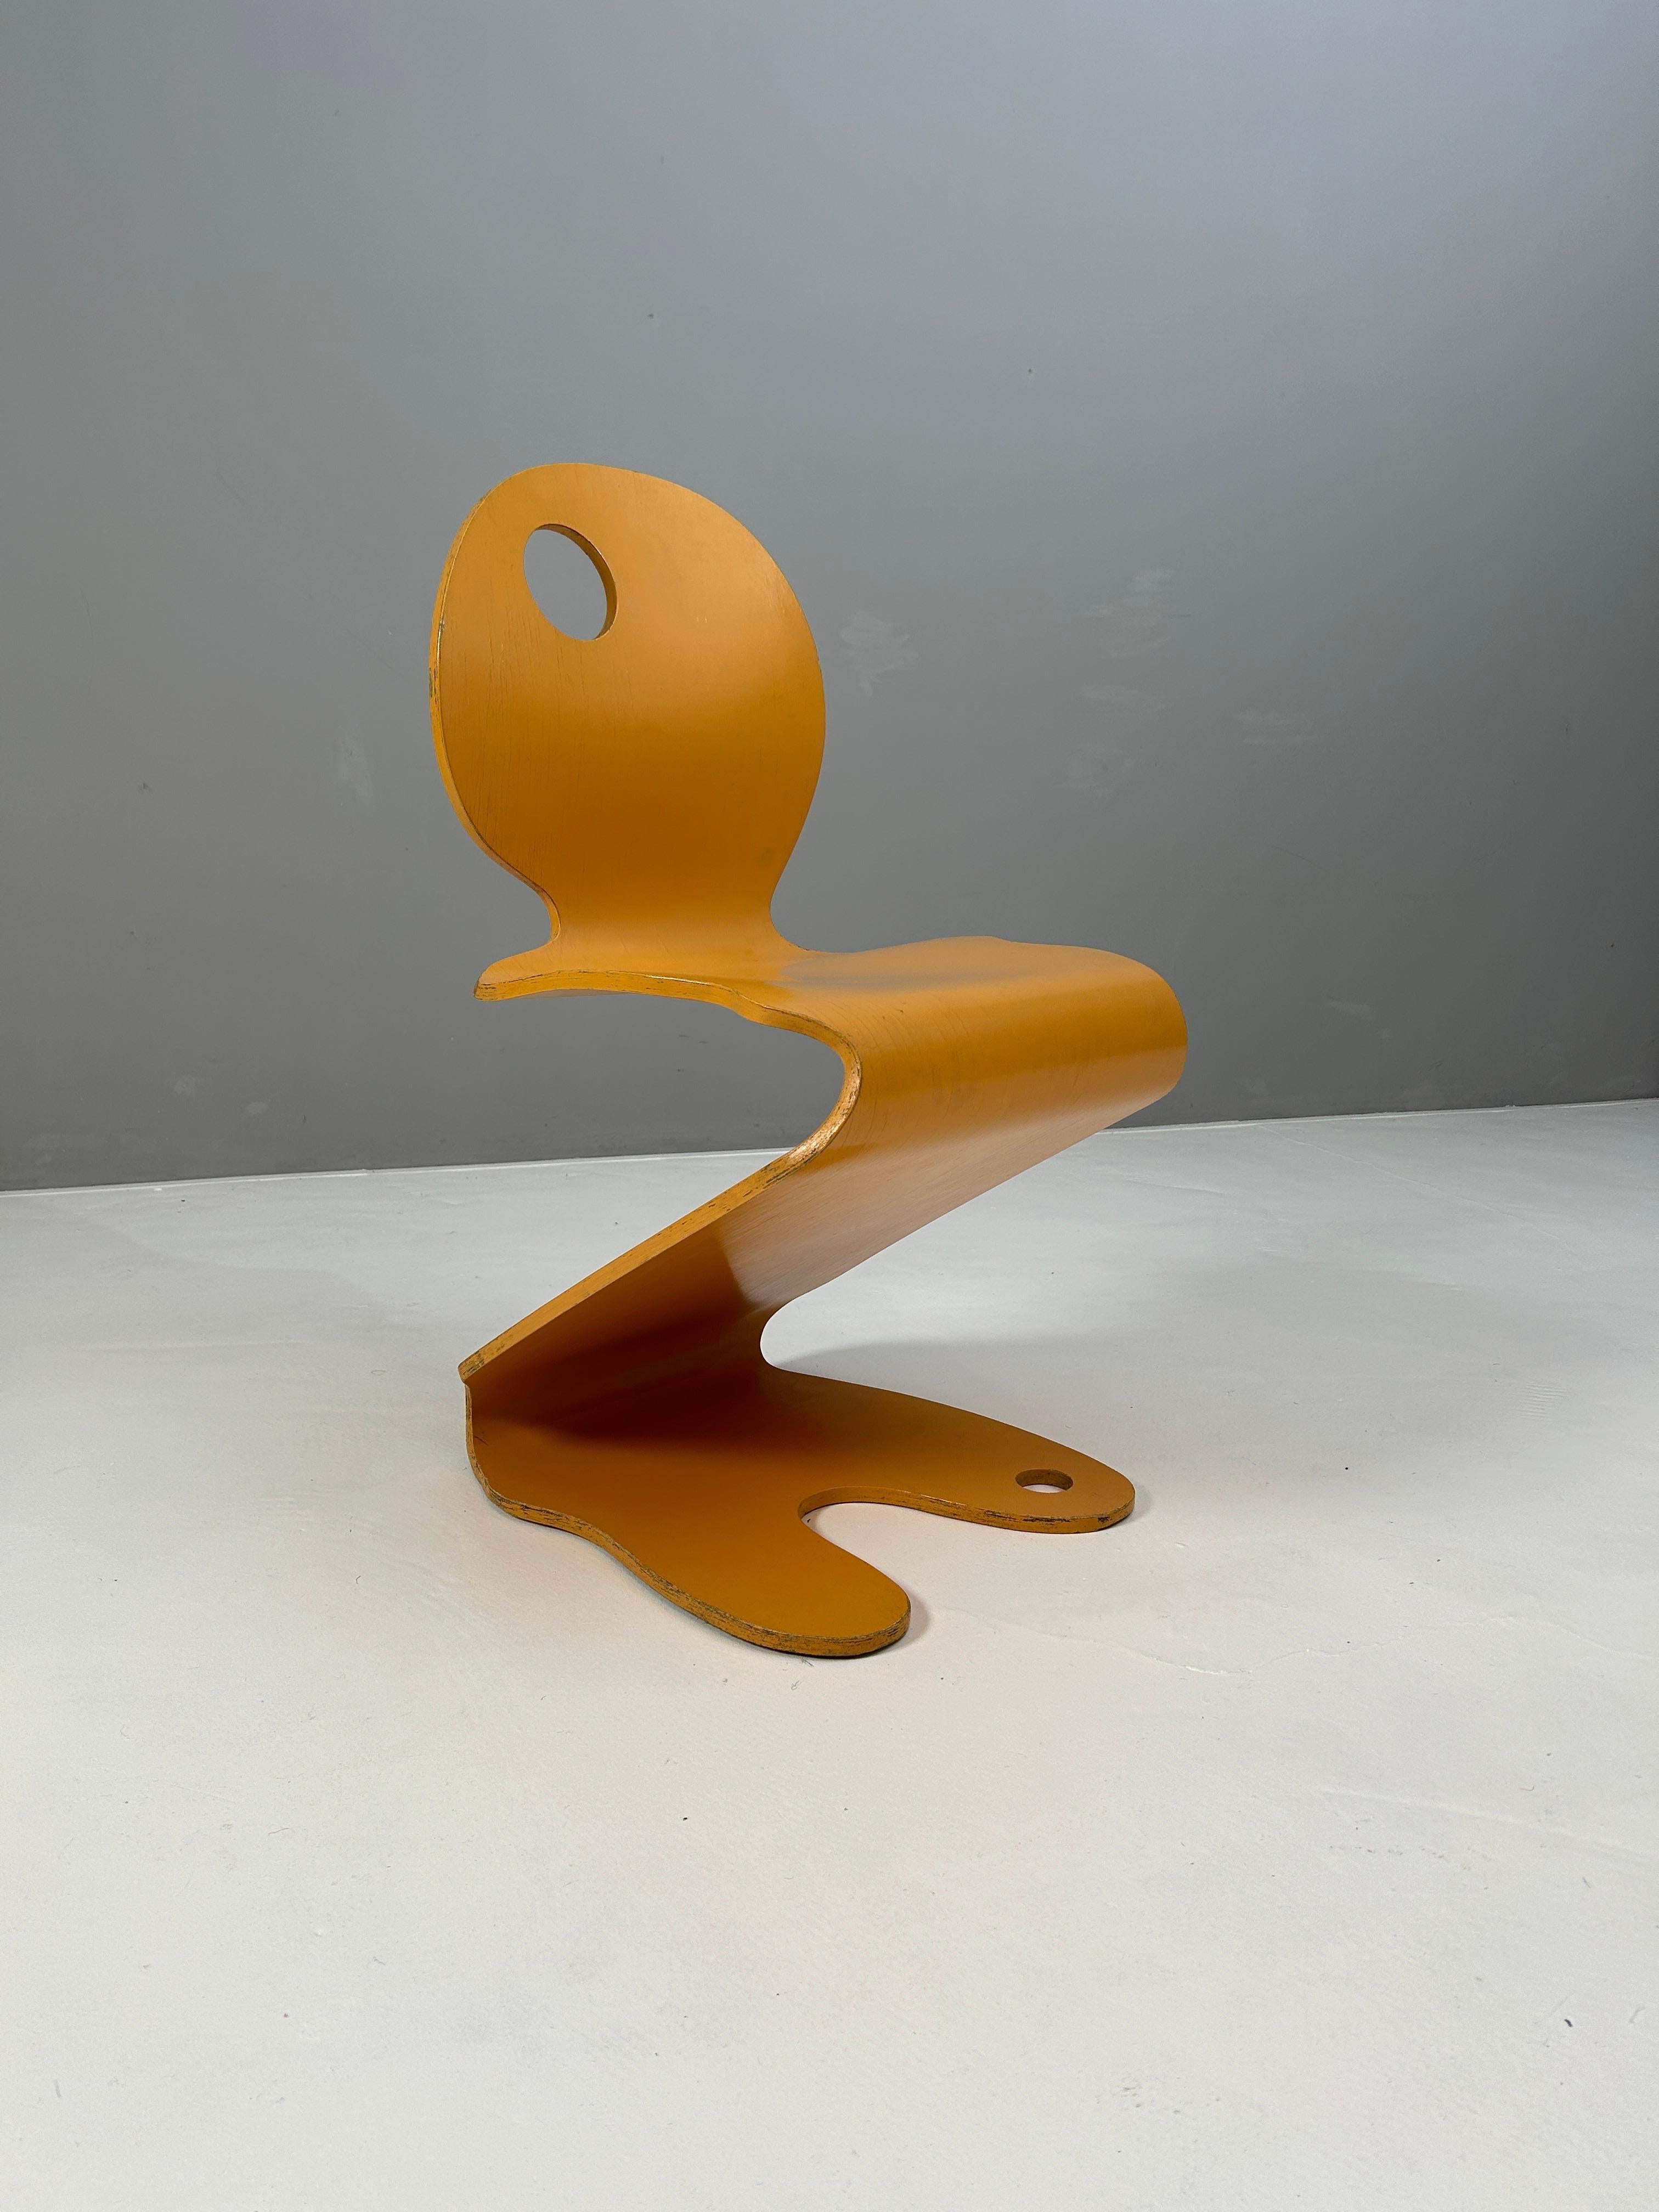 Verner Panton created this comfortable chair based on the S. Chair. The original coloring shows signs of wear.
Molded plywood, ochre-colored